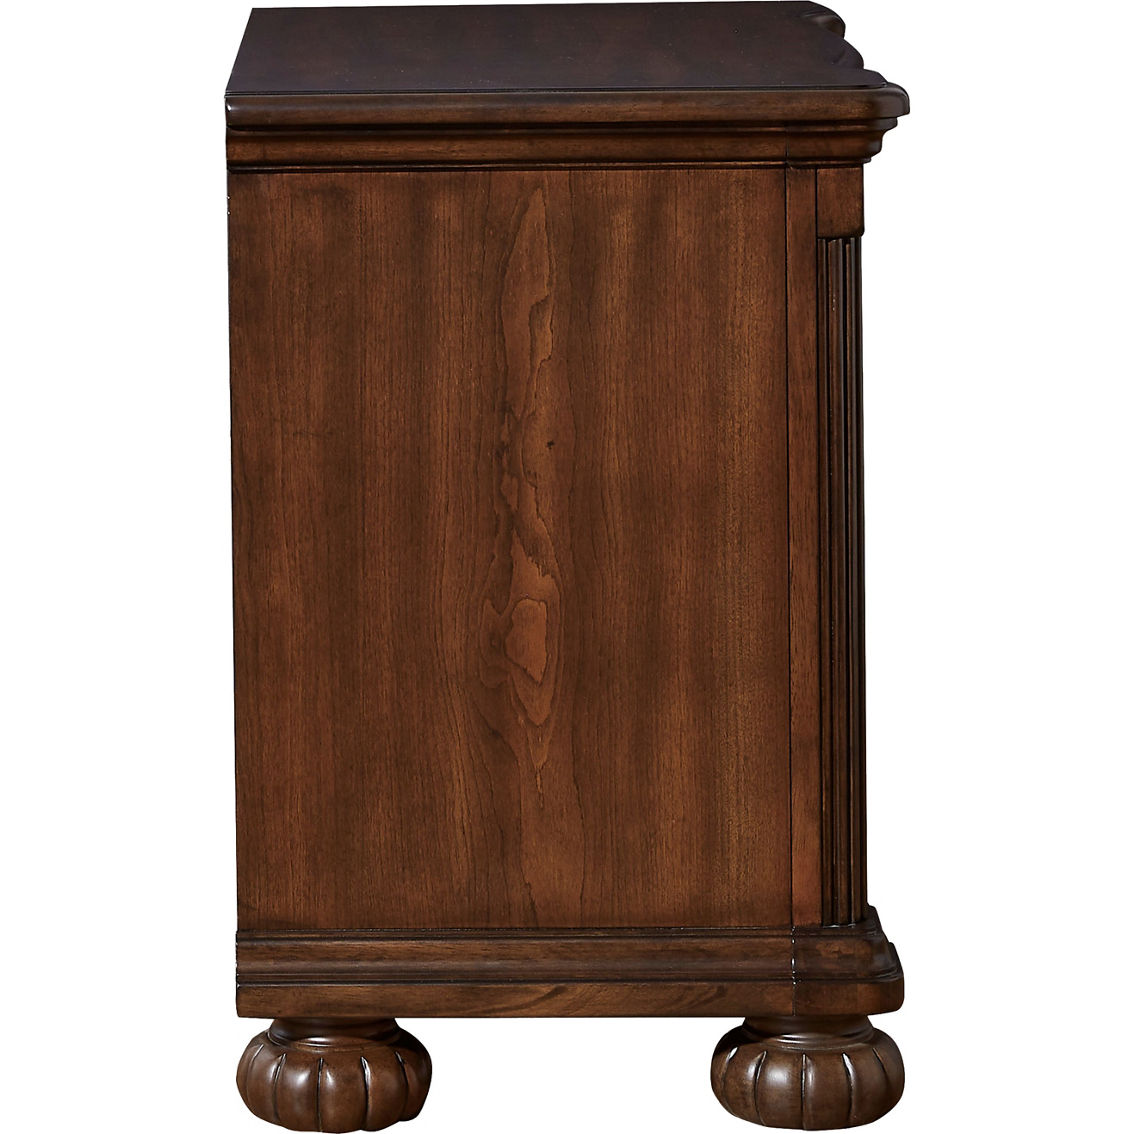 Signature Design by Ashley Lavinton Nightstand - Image 2 of 8